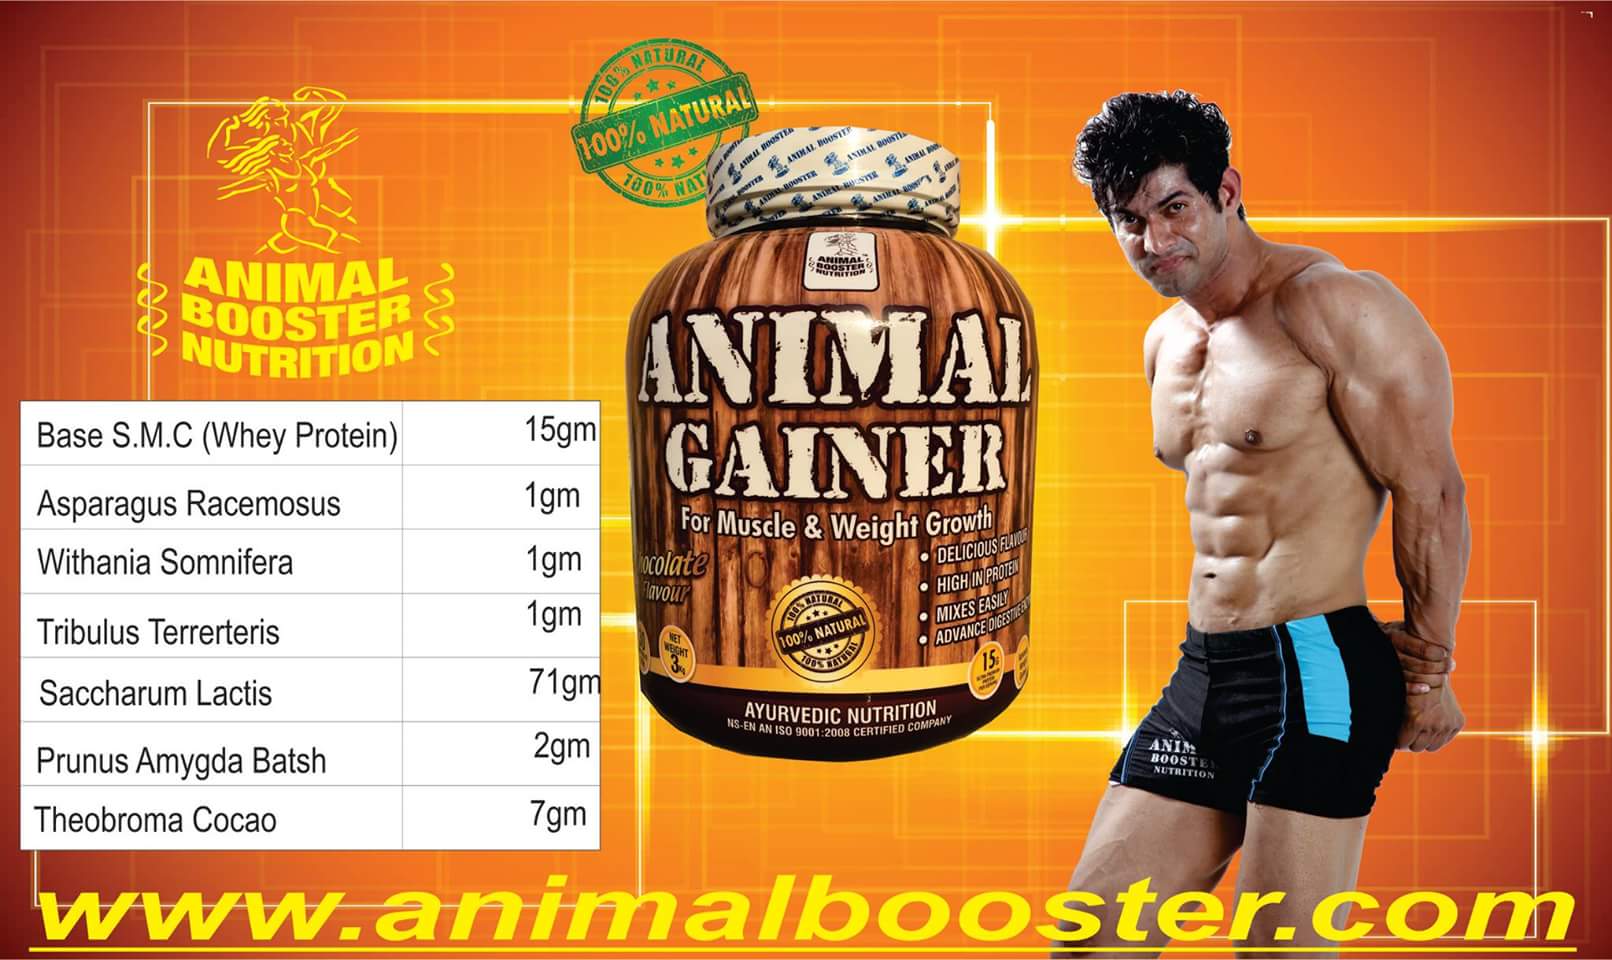 Animal Booster Nutrition on Twitter: 